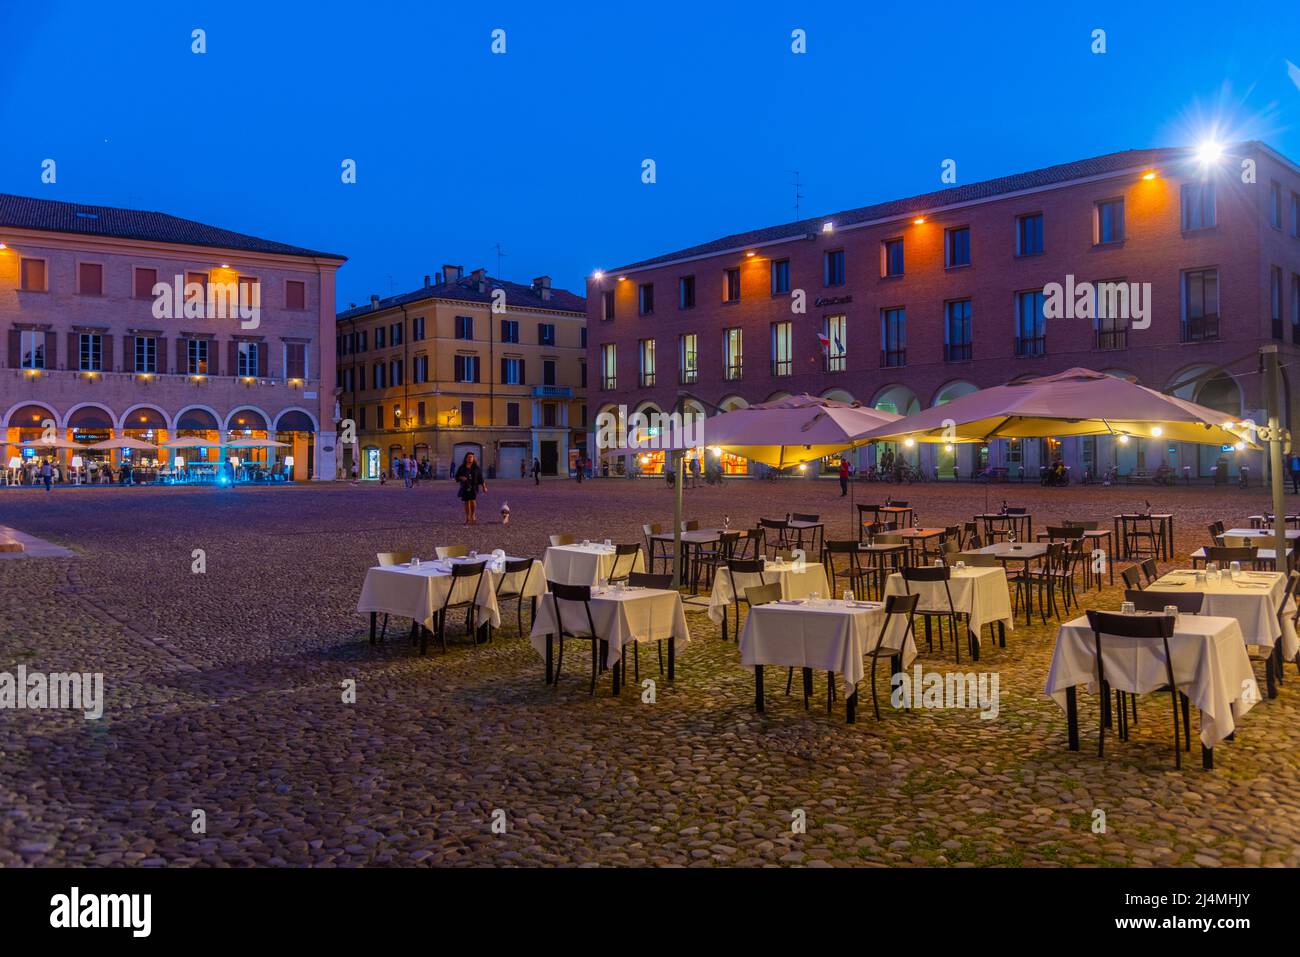 Modena, Italy, September 22, 2021: Sunset view of Piazza Grande in Italian town Modena. Stock Photo